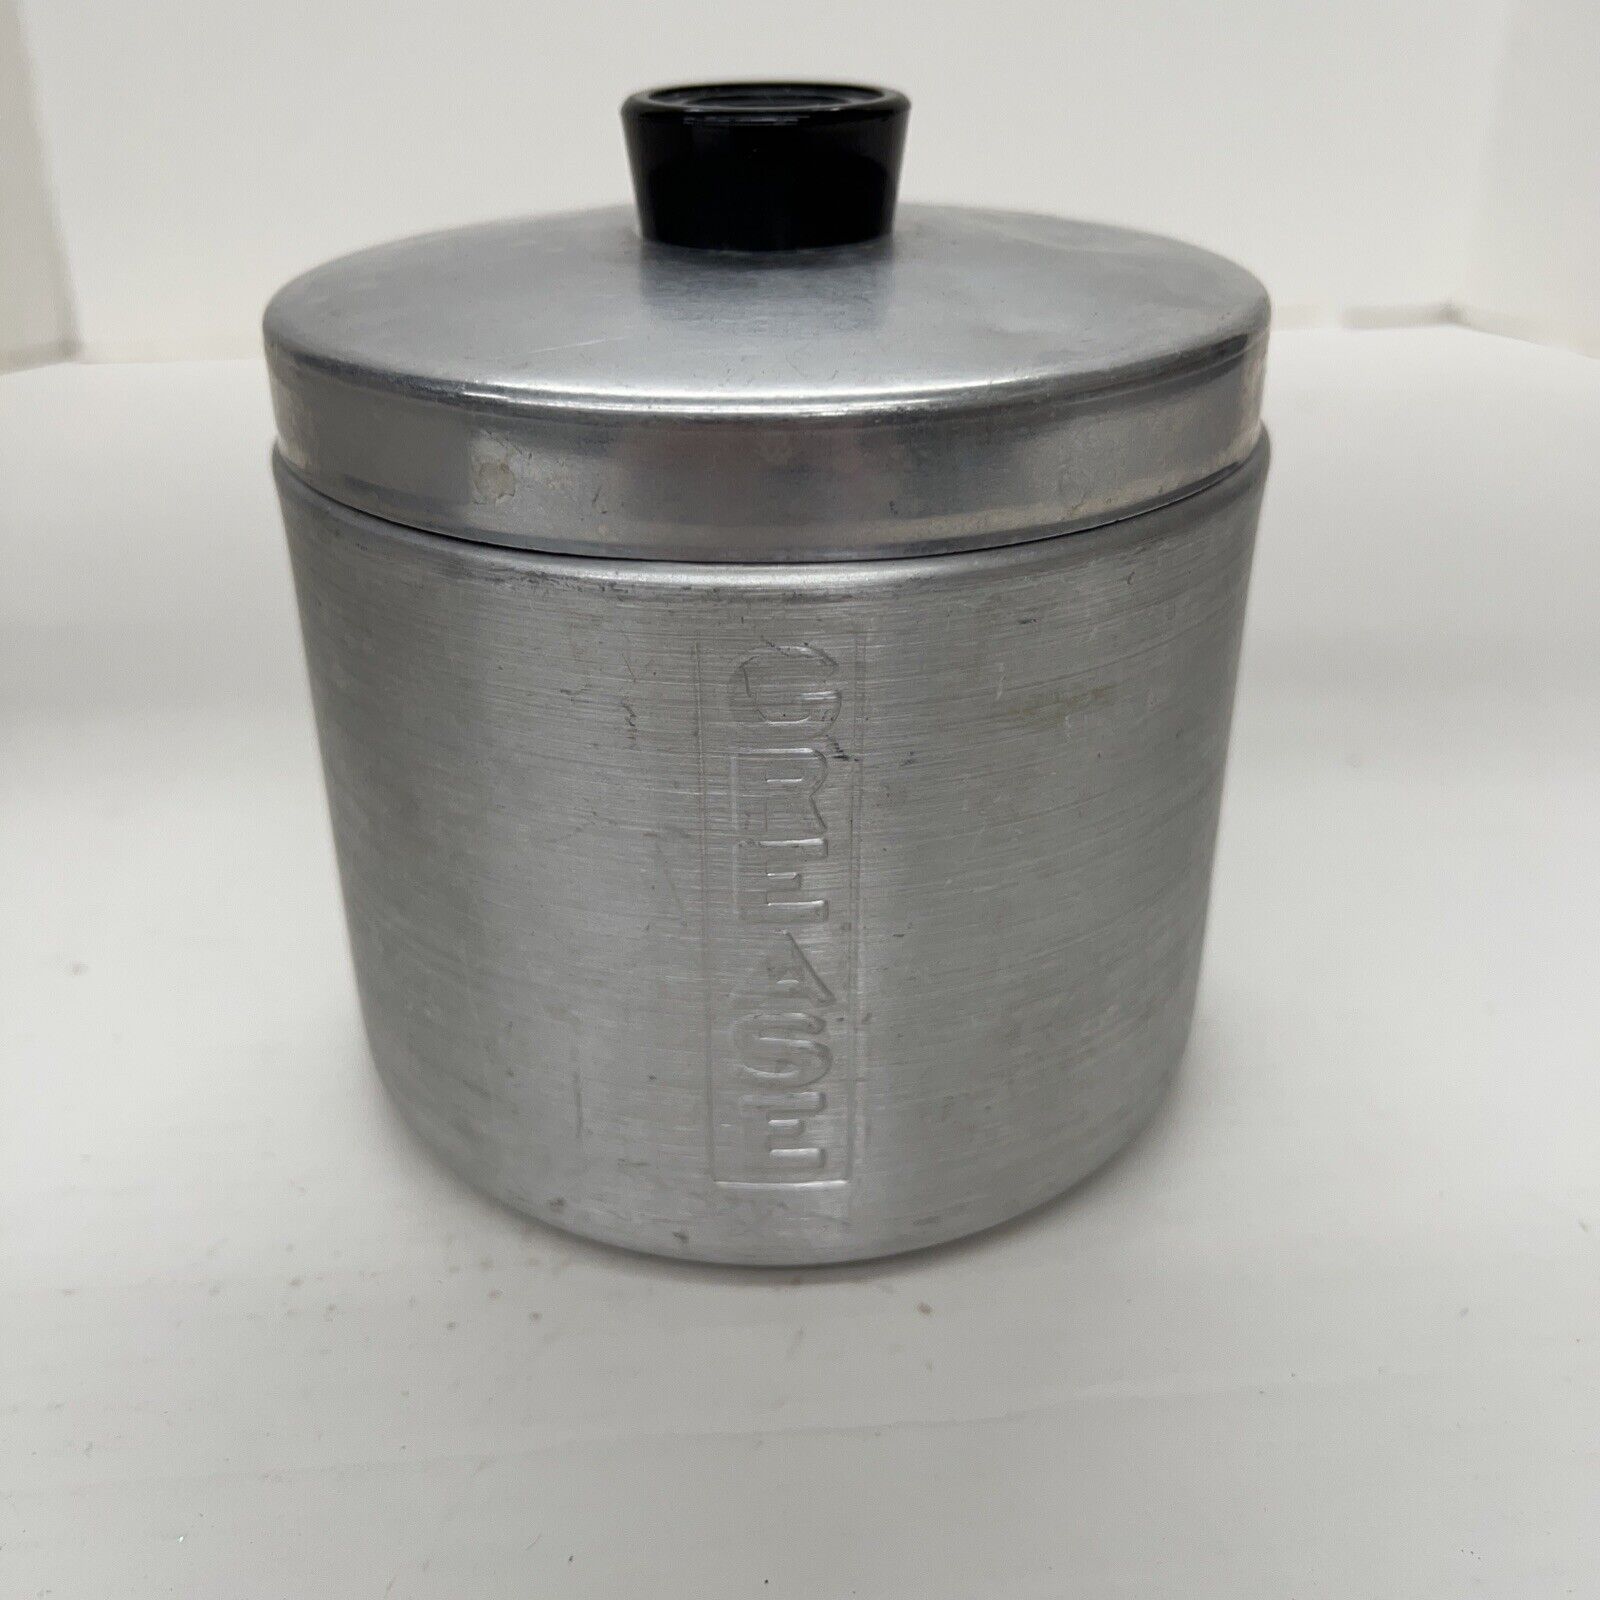 Vintage Aluminum Ware Canister for grease